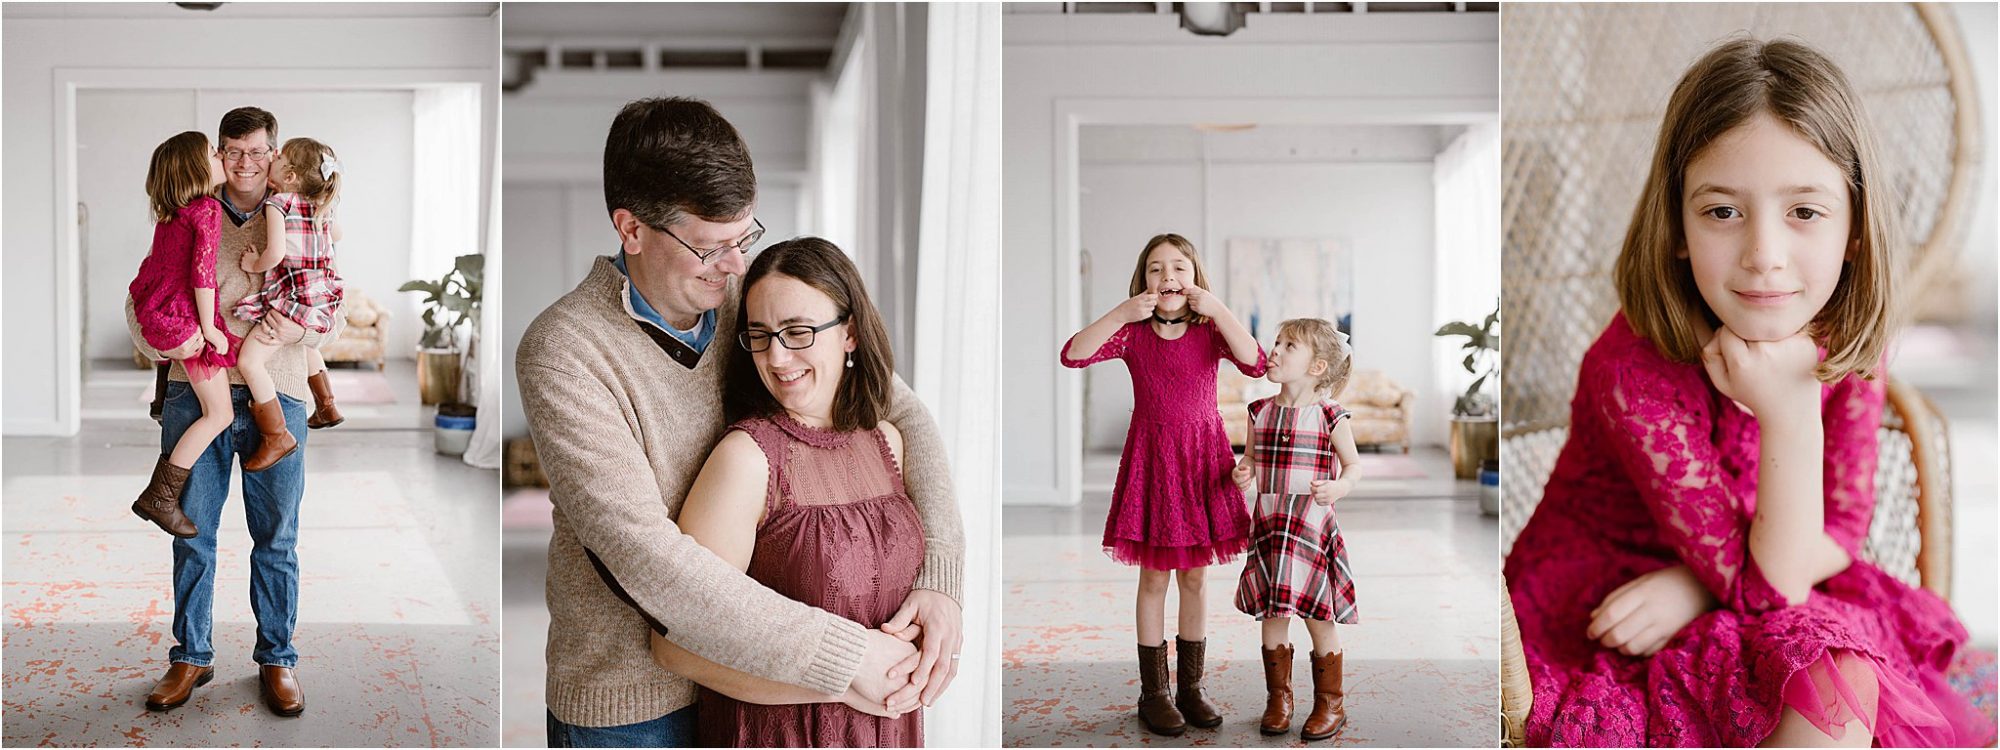 Indoor Family Photos in Knoxville